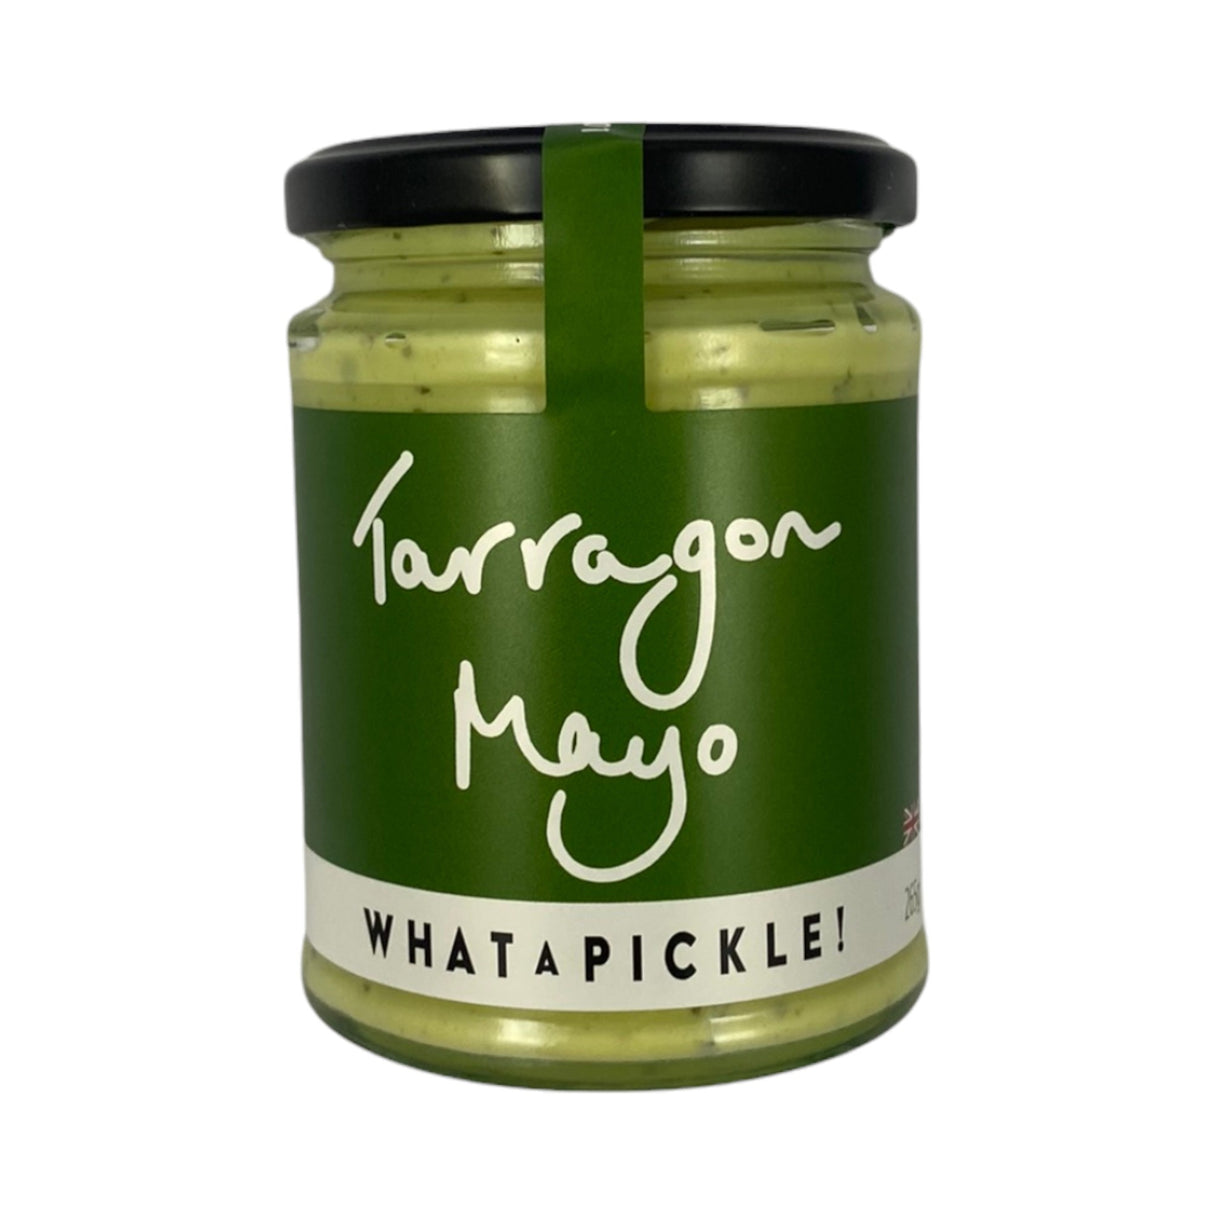 What a Pickle! - Tarragon Mayo 265g